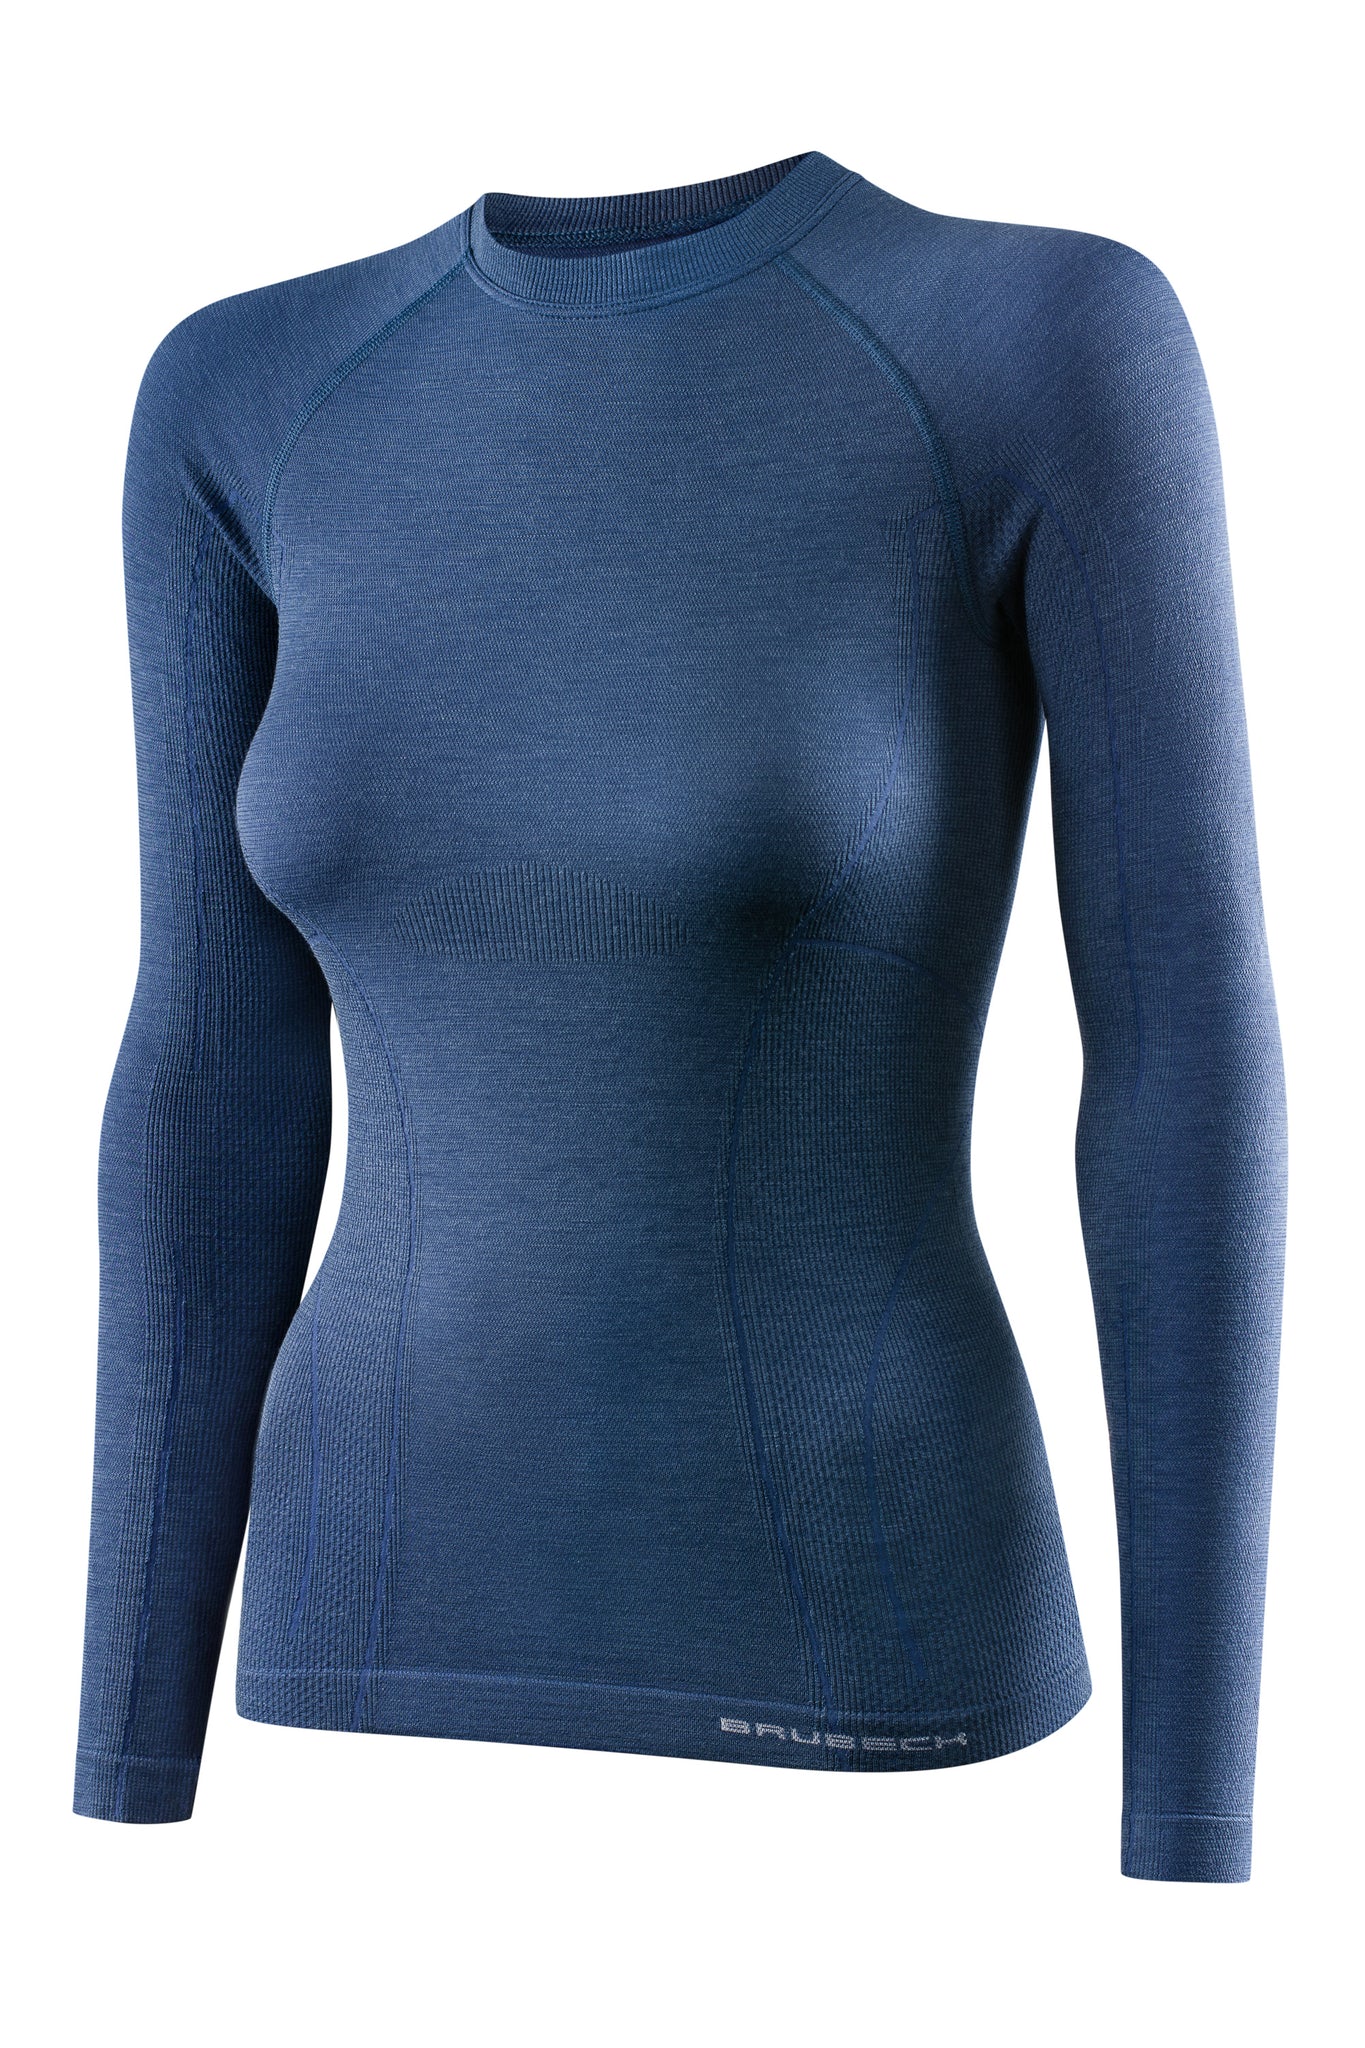 SKINS LONG SLEEVE COMPRESSION TOP – The Sport Shop New Zealand